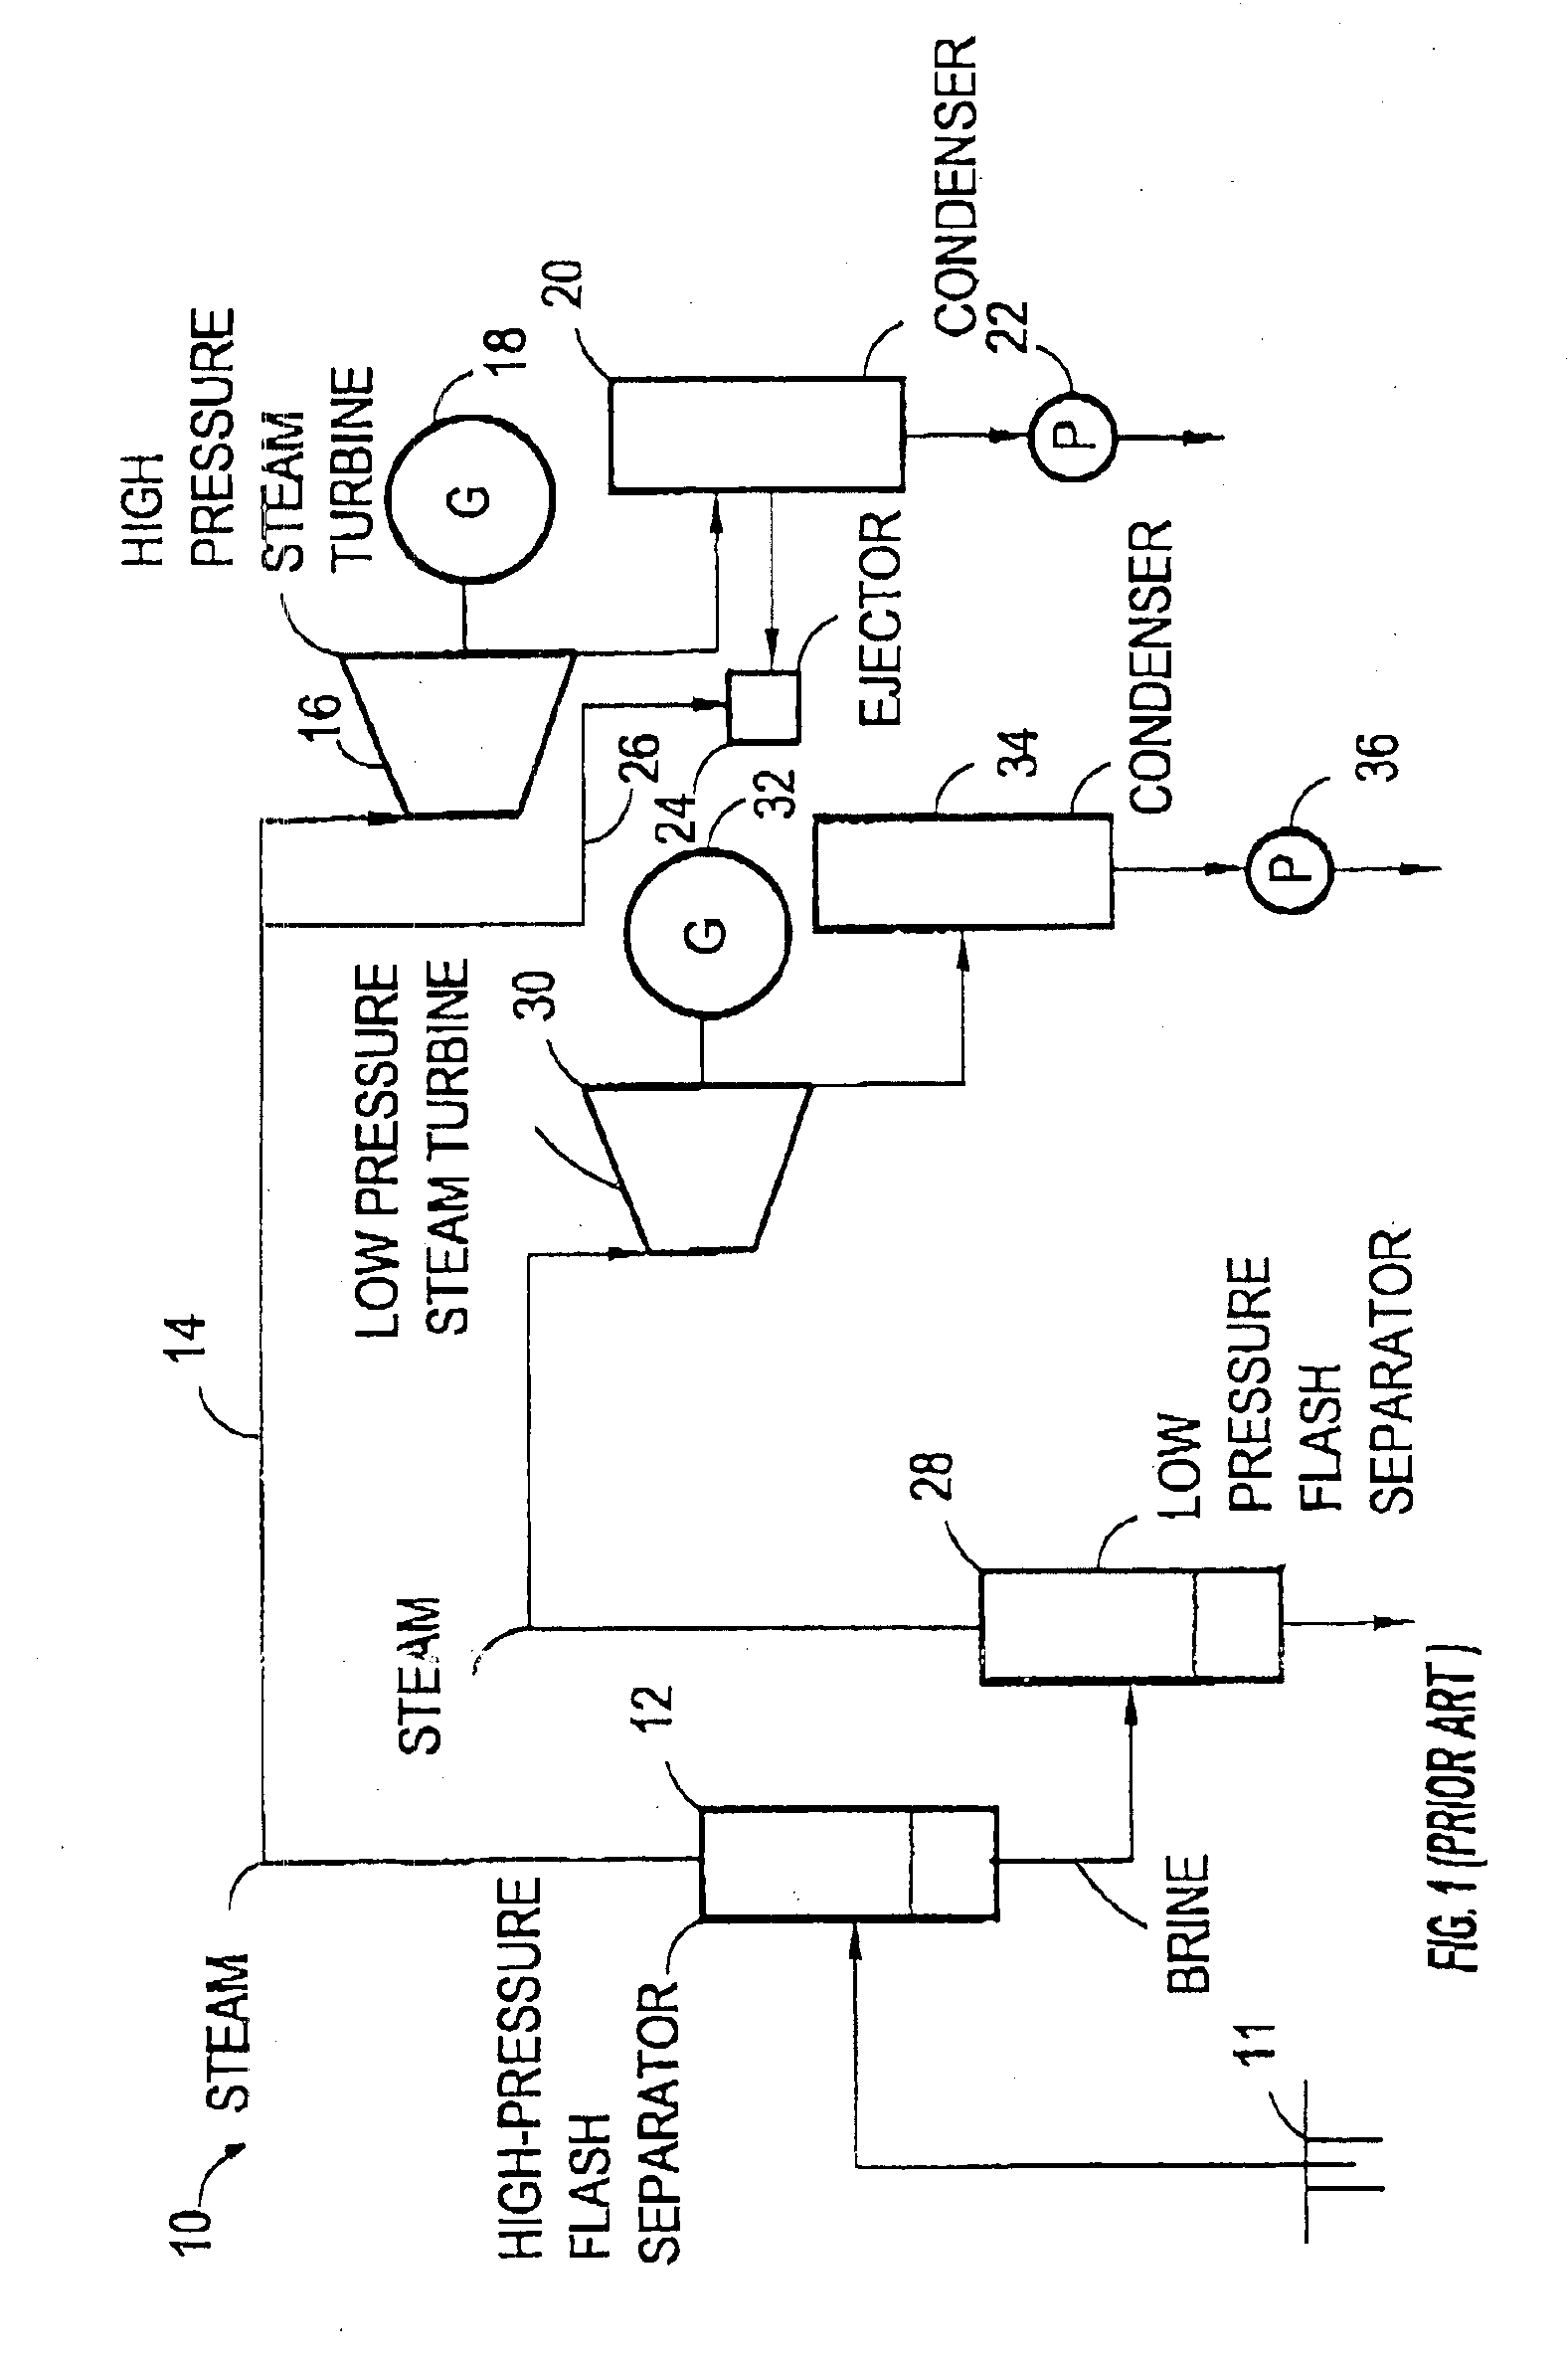 Method of and apparatus for increasing the output of a geothermal steam power plant